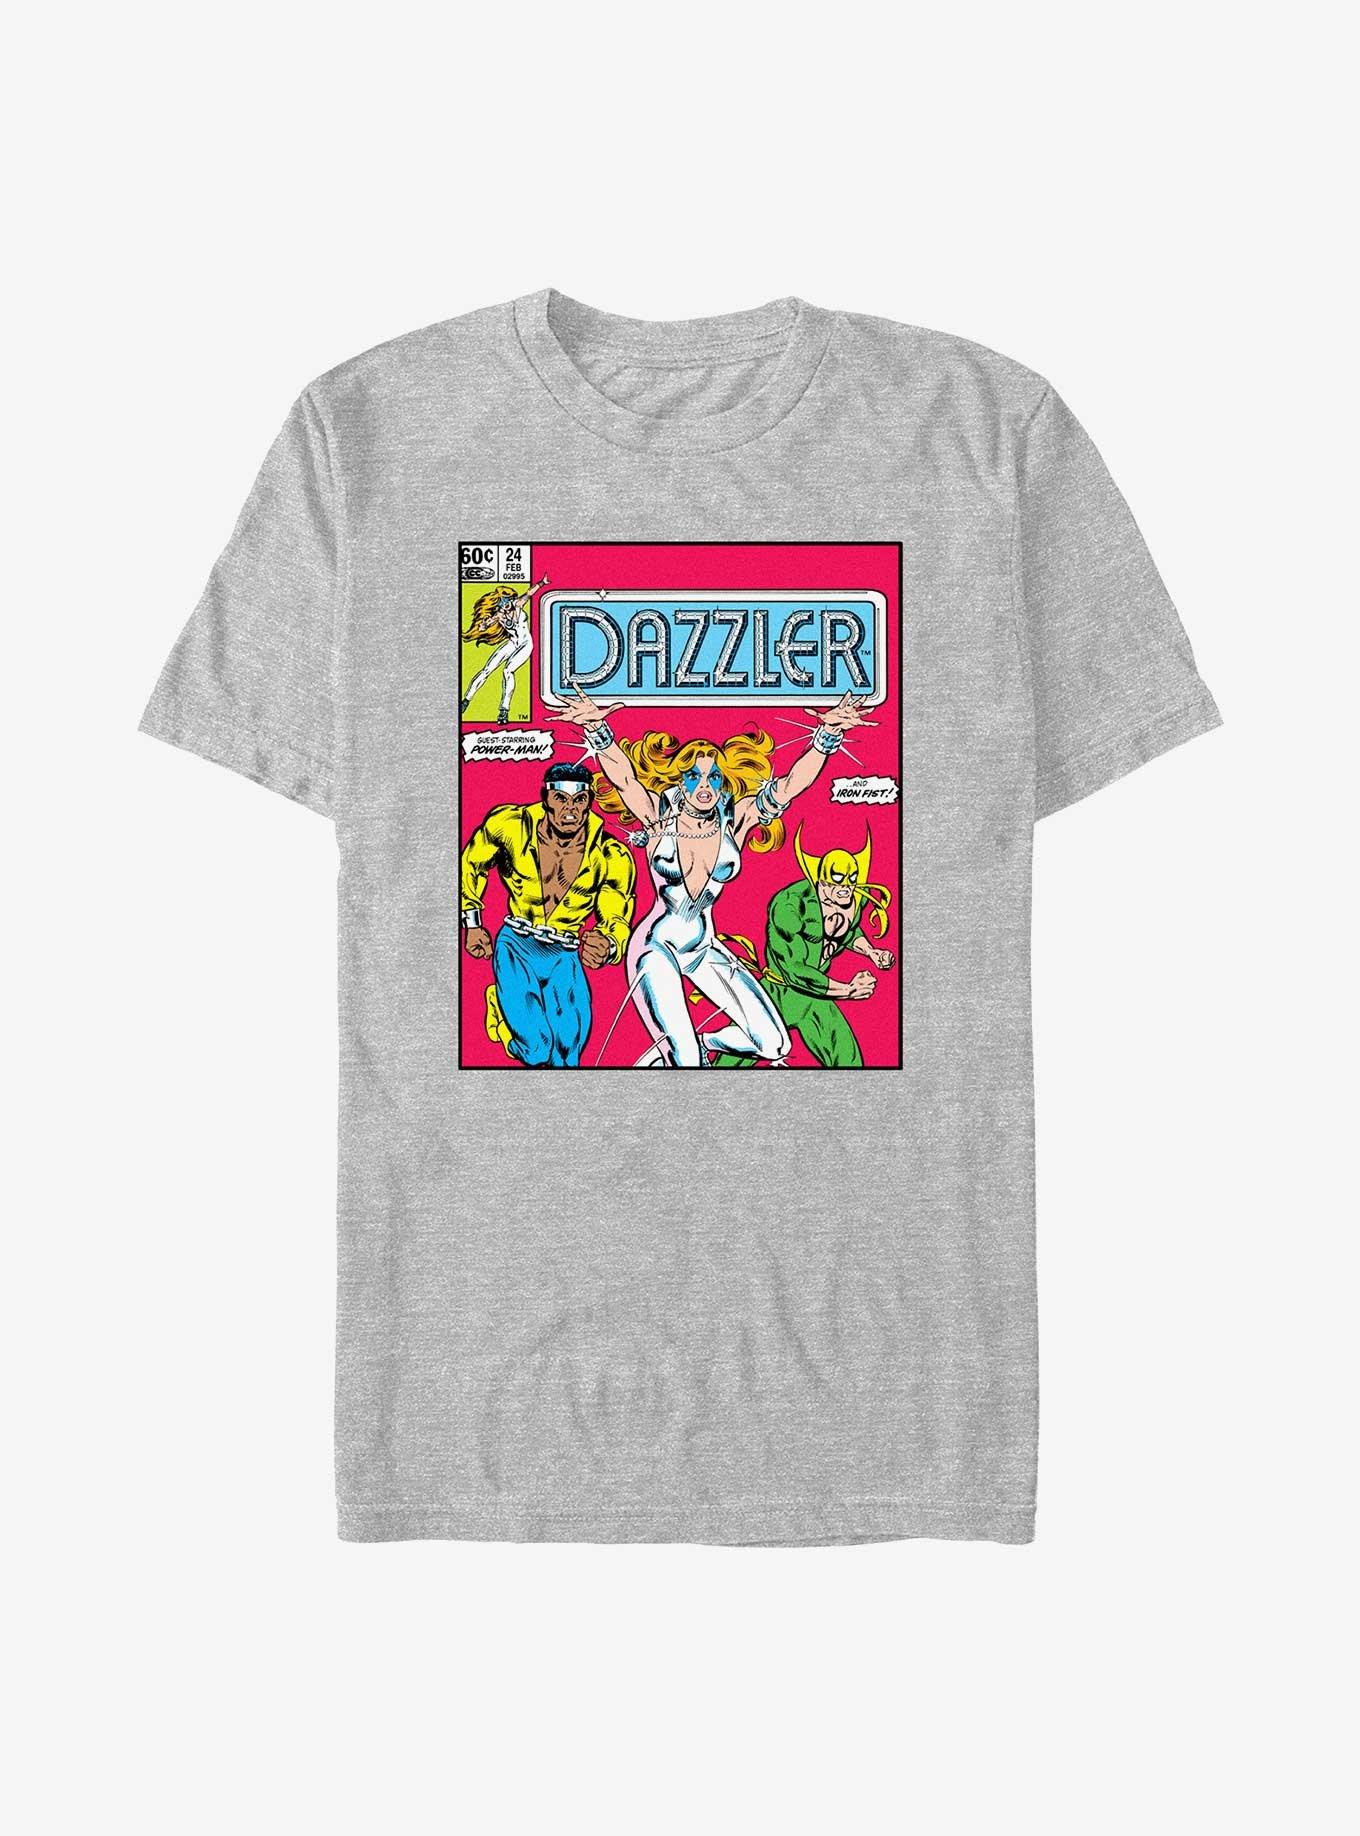 Marvel Dazzler Power Man and Iron Fist Comic Cover T-Shirt, , hi-res